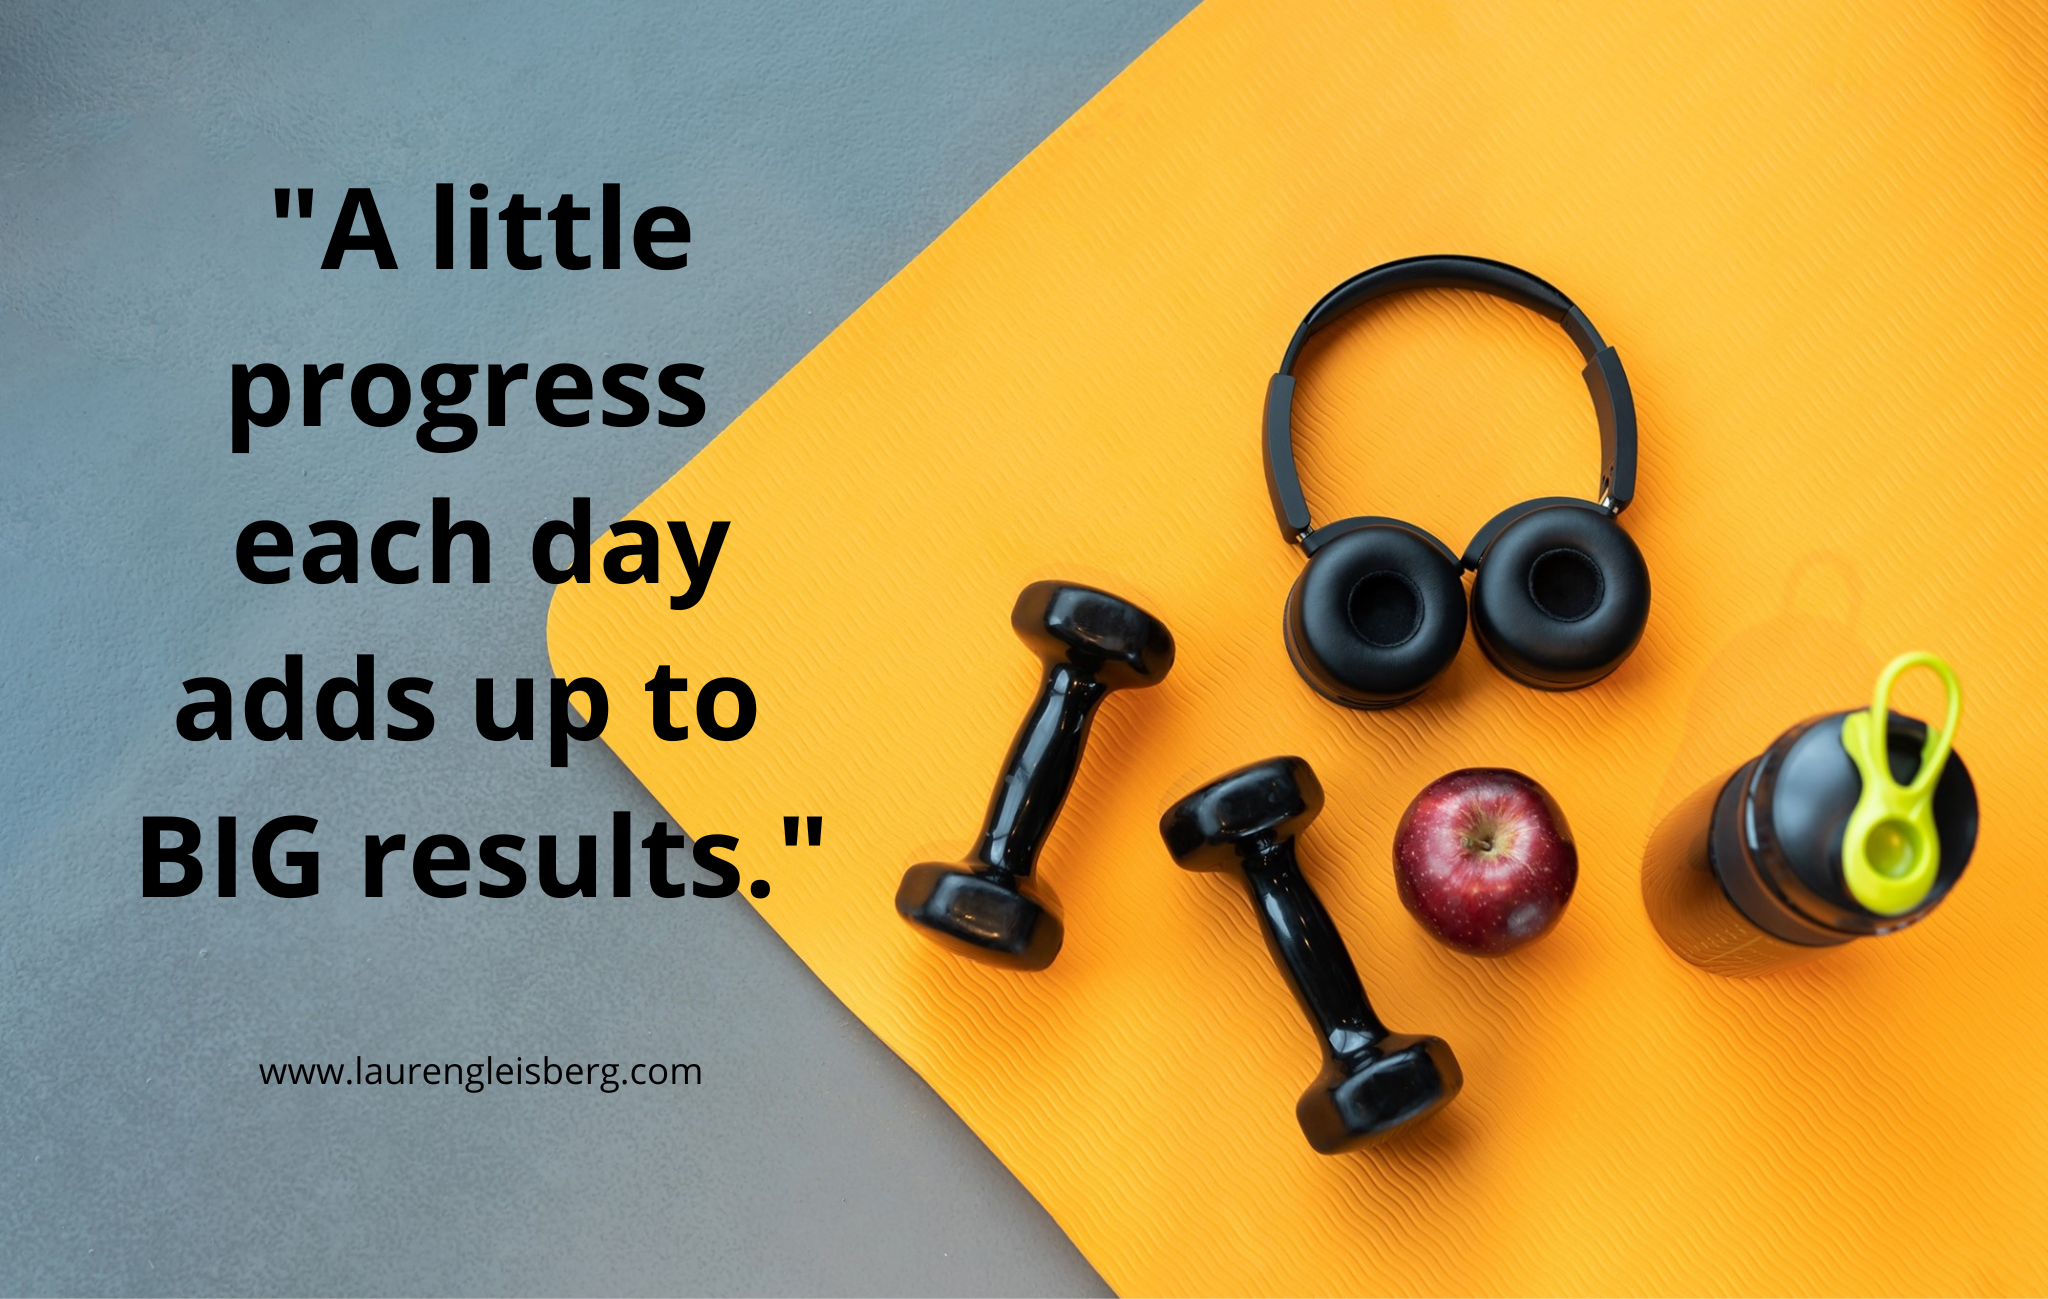 A little progress each day adds up to BIG results